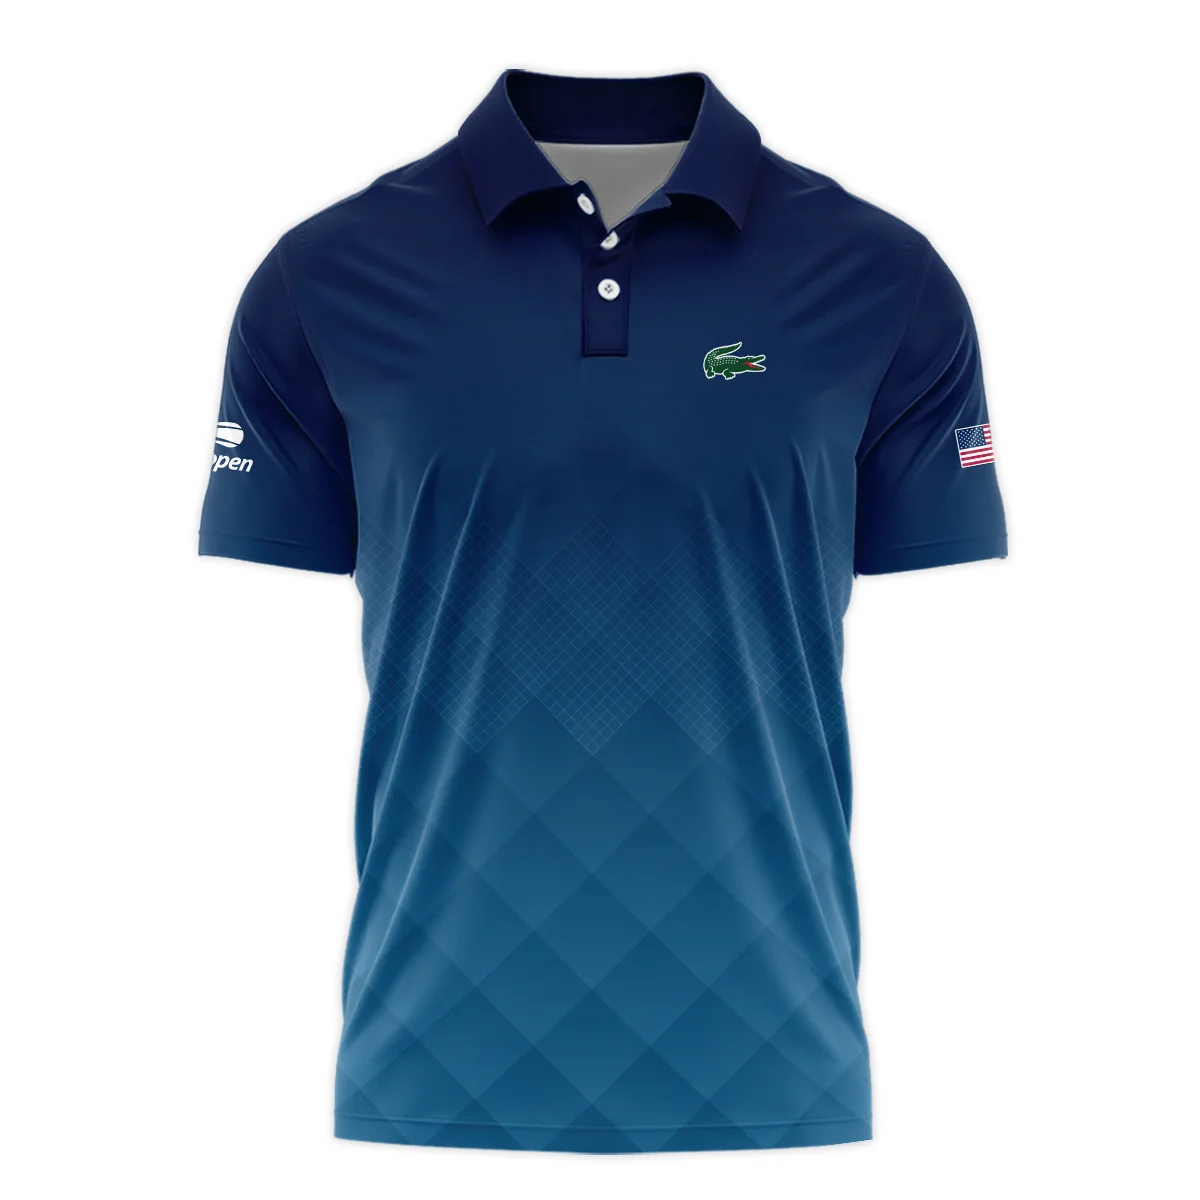 Lacoste Blue Abstract Background US Open Tennis Champions Zipper Polo Shirt Style Classic Zipper Polo Shirt For Men